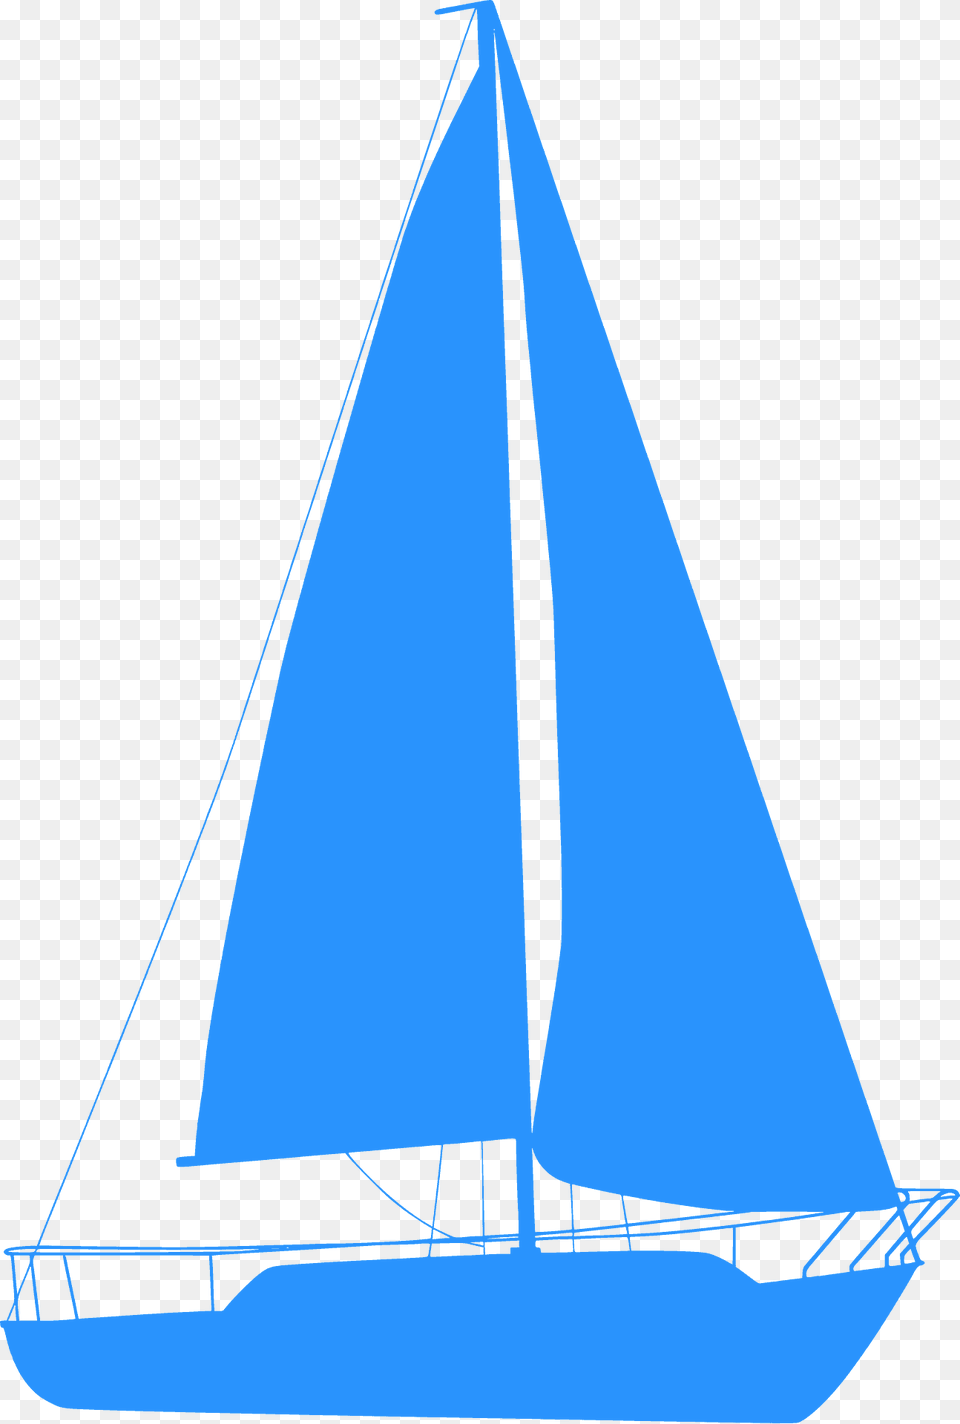 Sailboat Silhouette, Boat, Transportation, Vehicle, Yacht Png